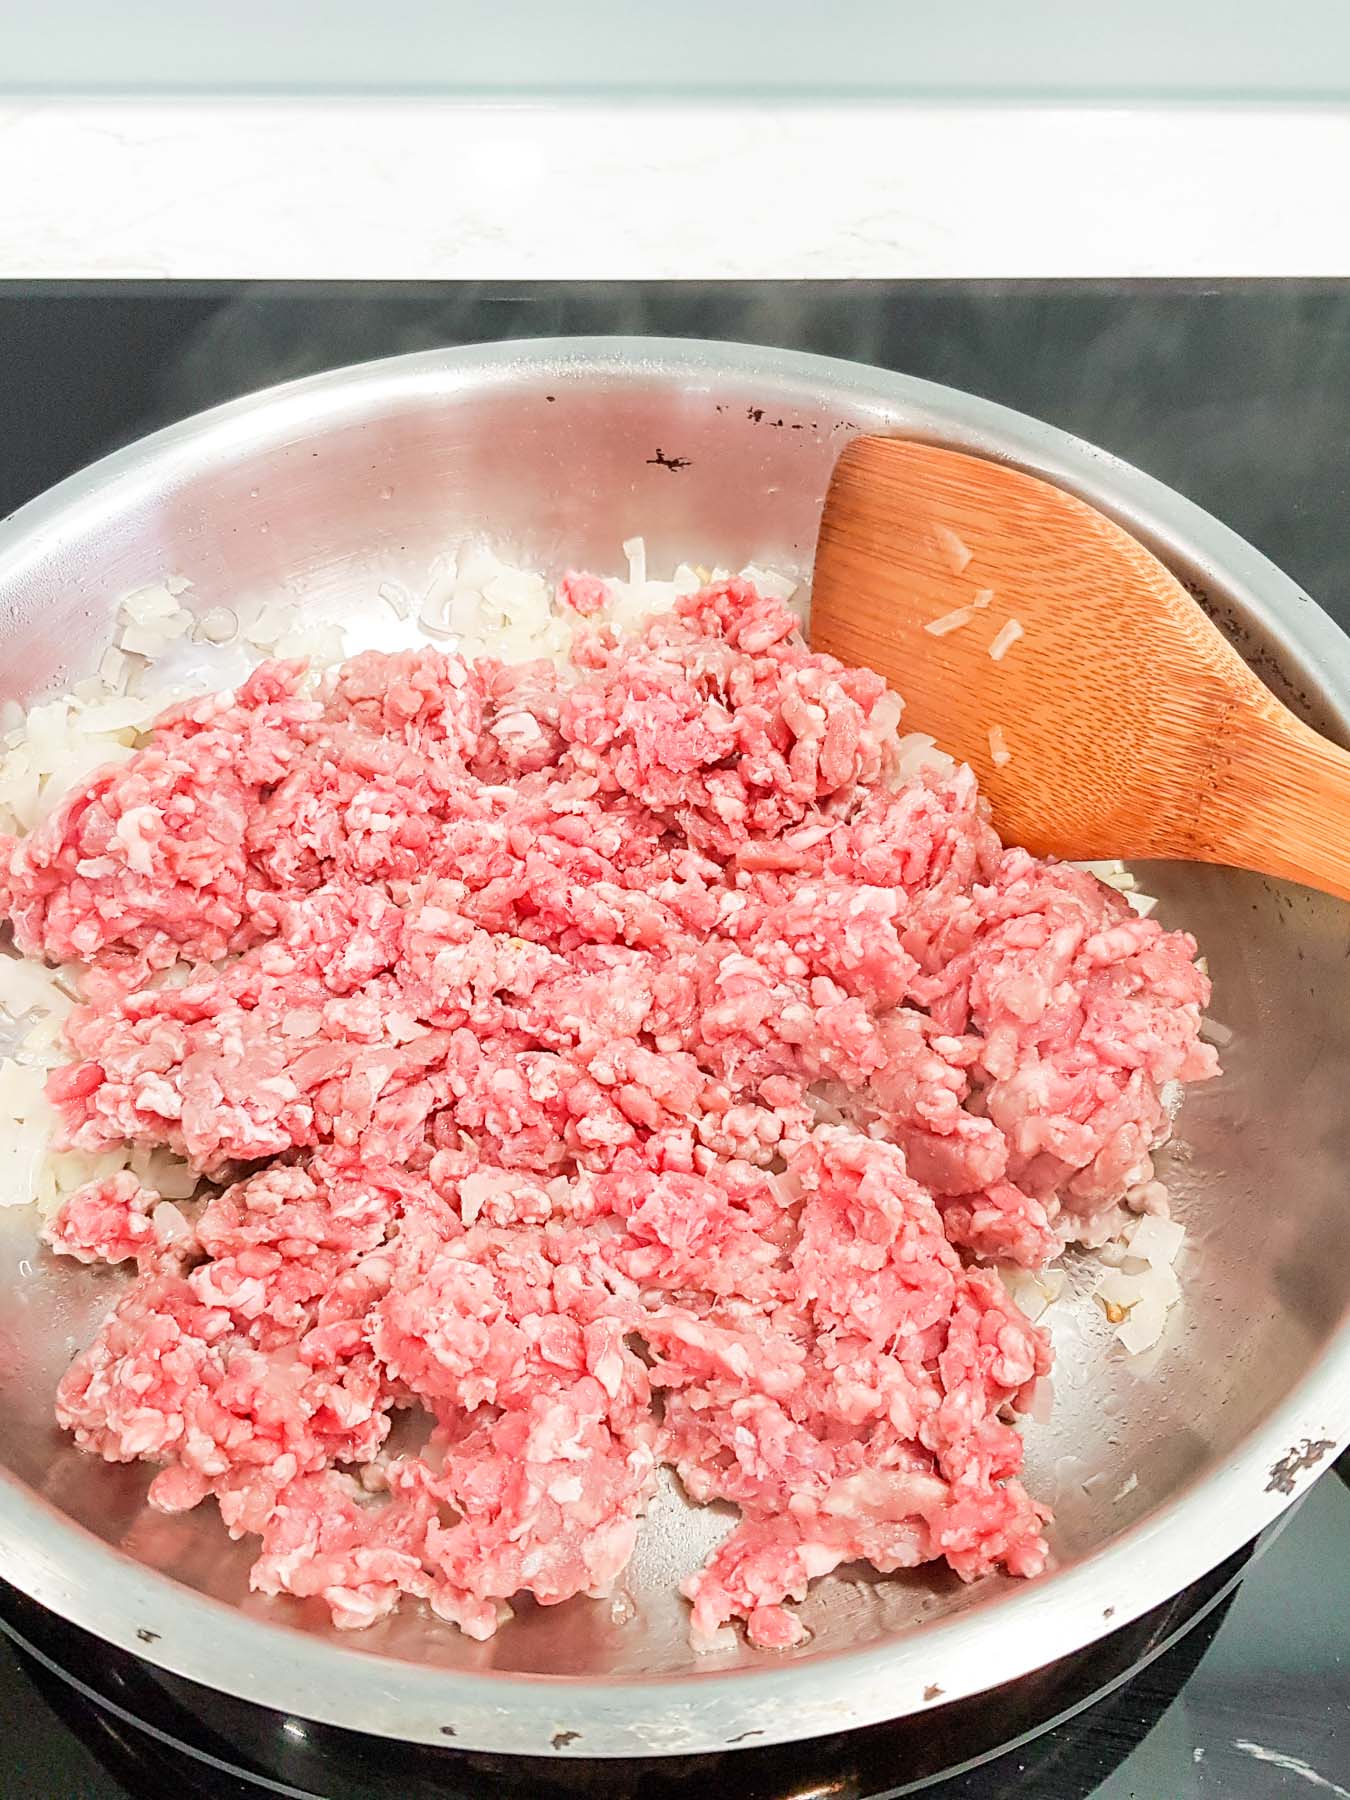 cooking ground beef in a skillet